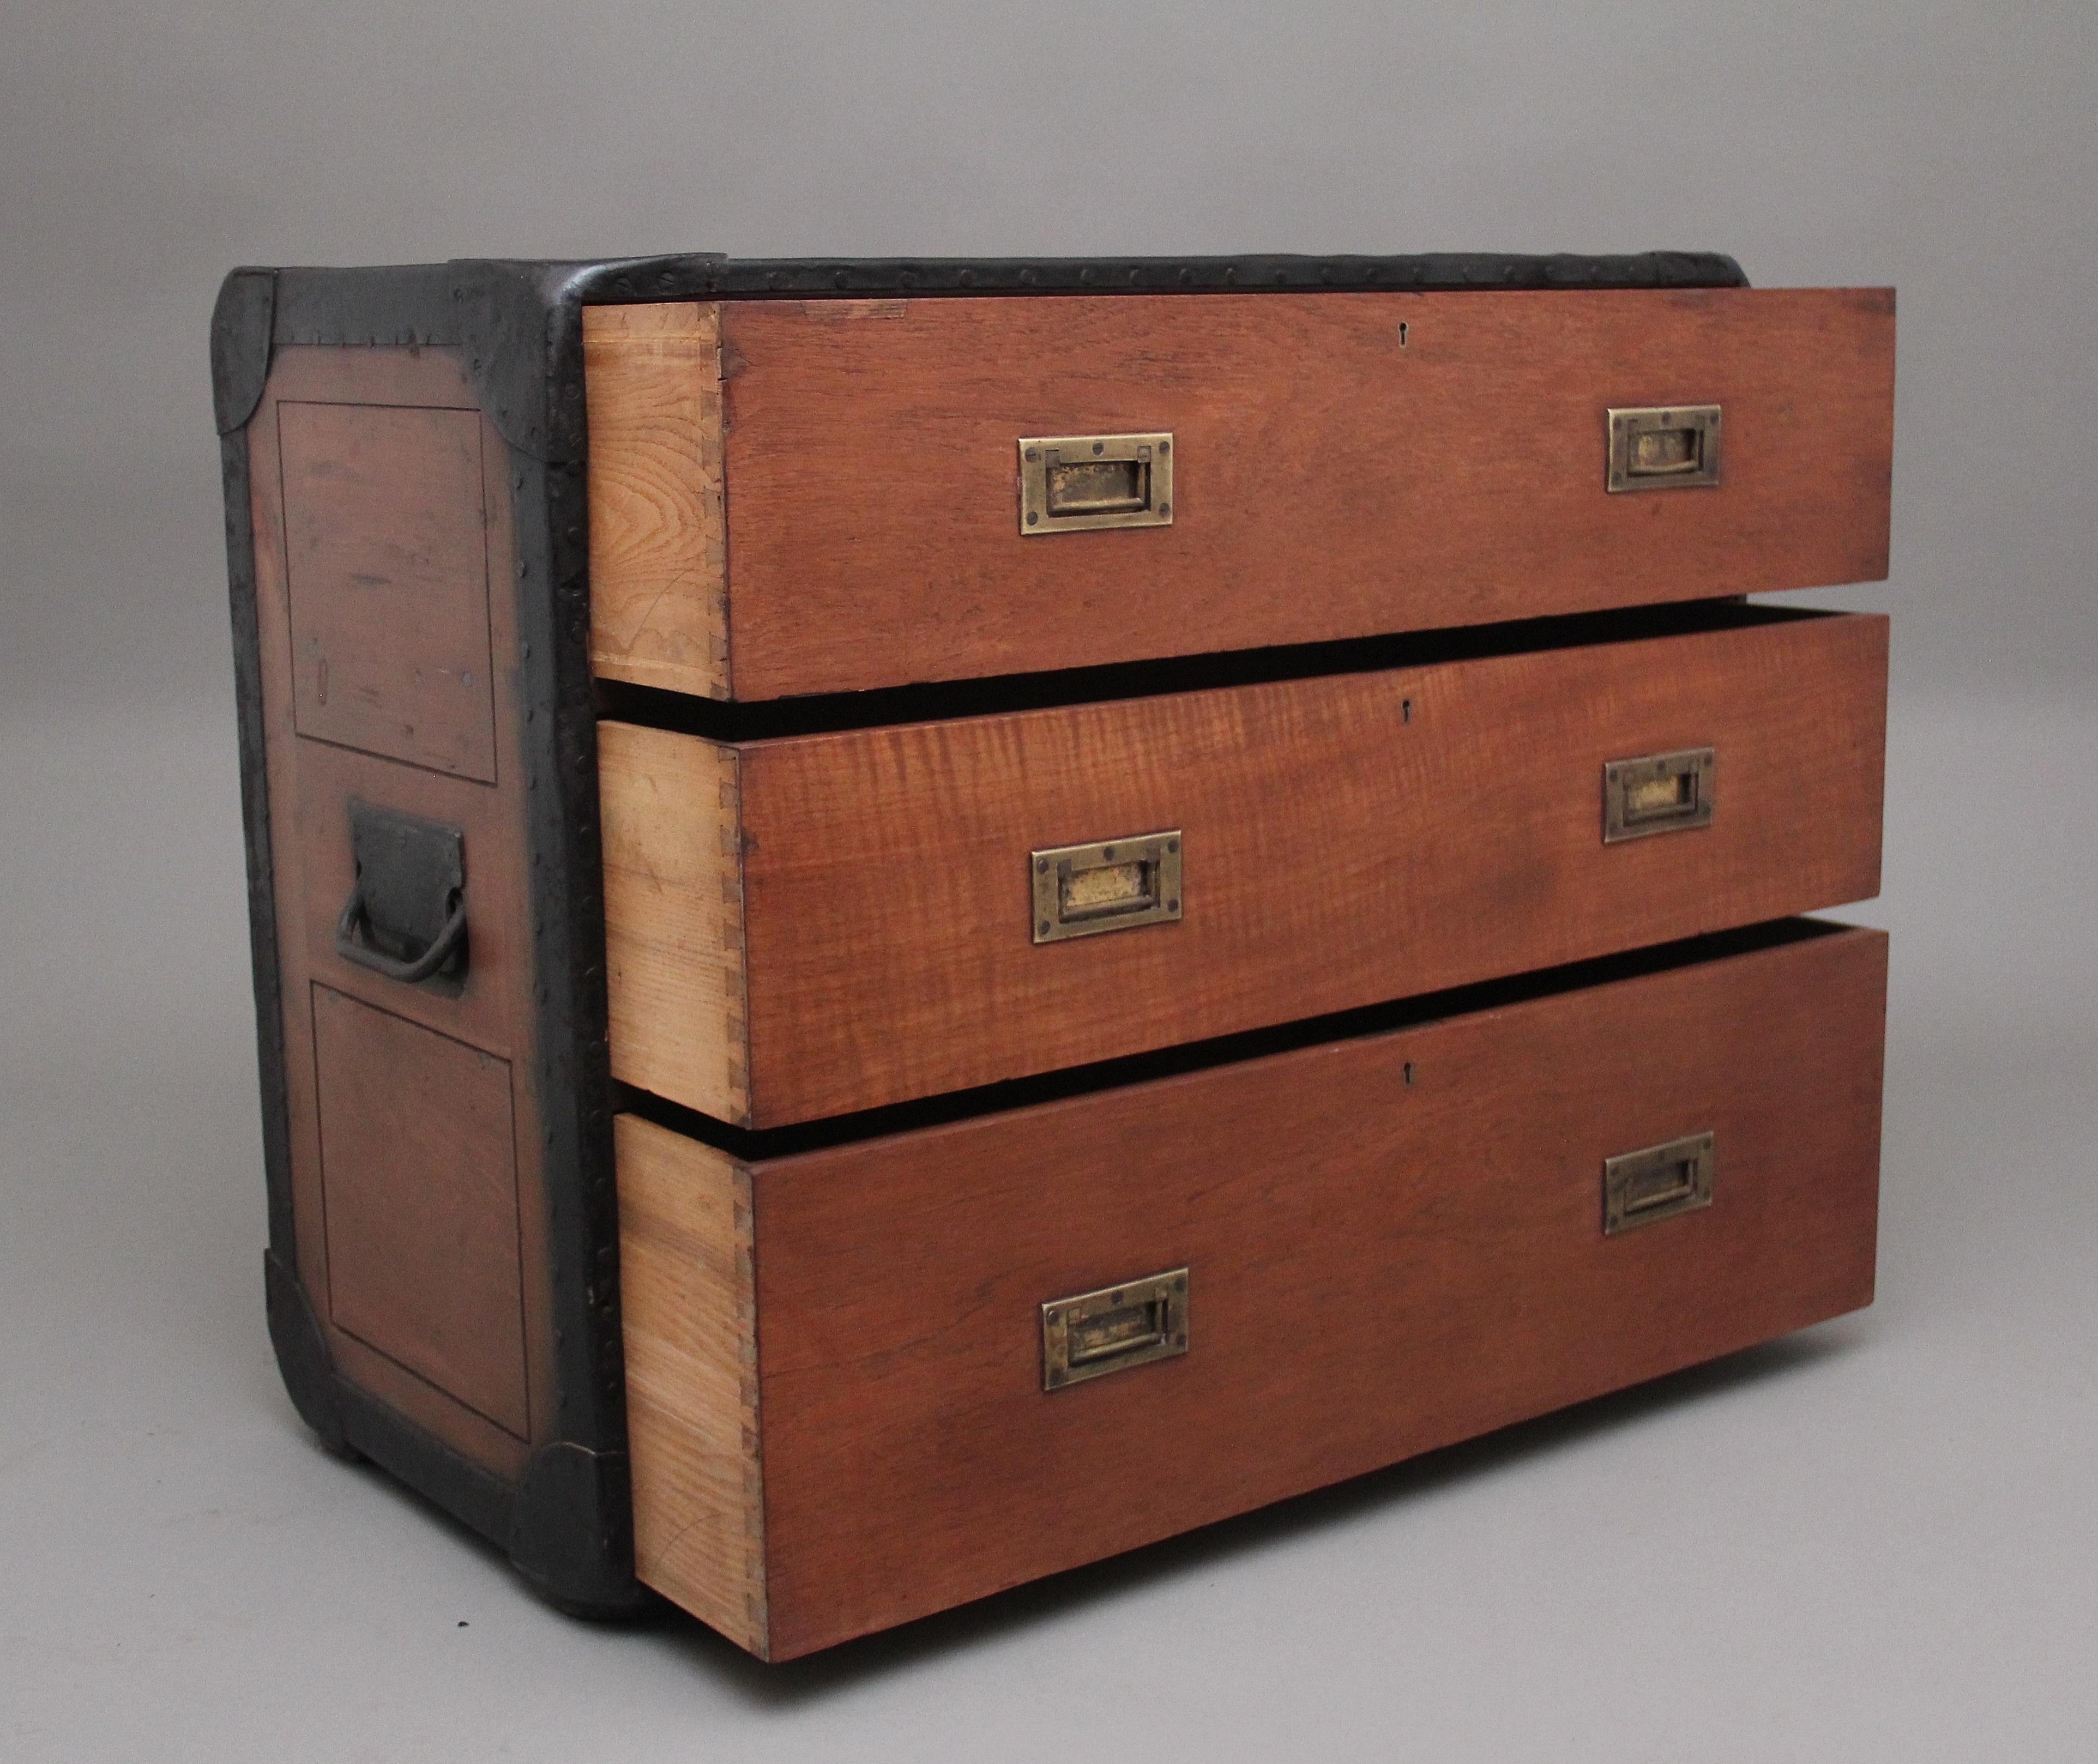 Early 20th Century Anglo-Indian camphor wood campaign chest, having three deep drawers with the original brass recessed handles, the sides of the chest having the original metal carrying handles, the chest having black metal straps around the edge